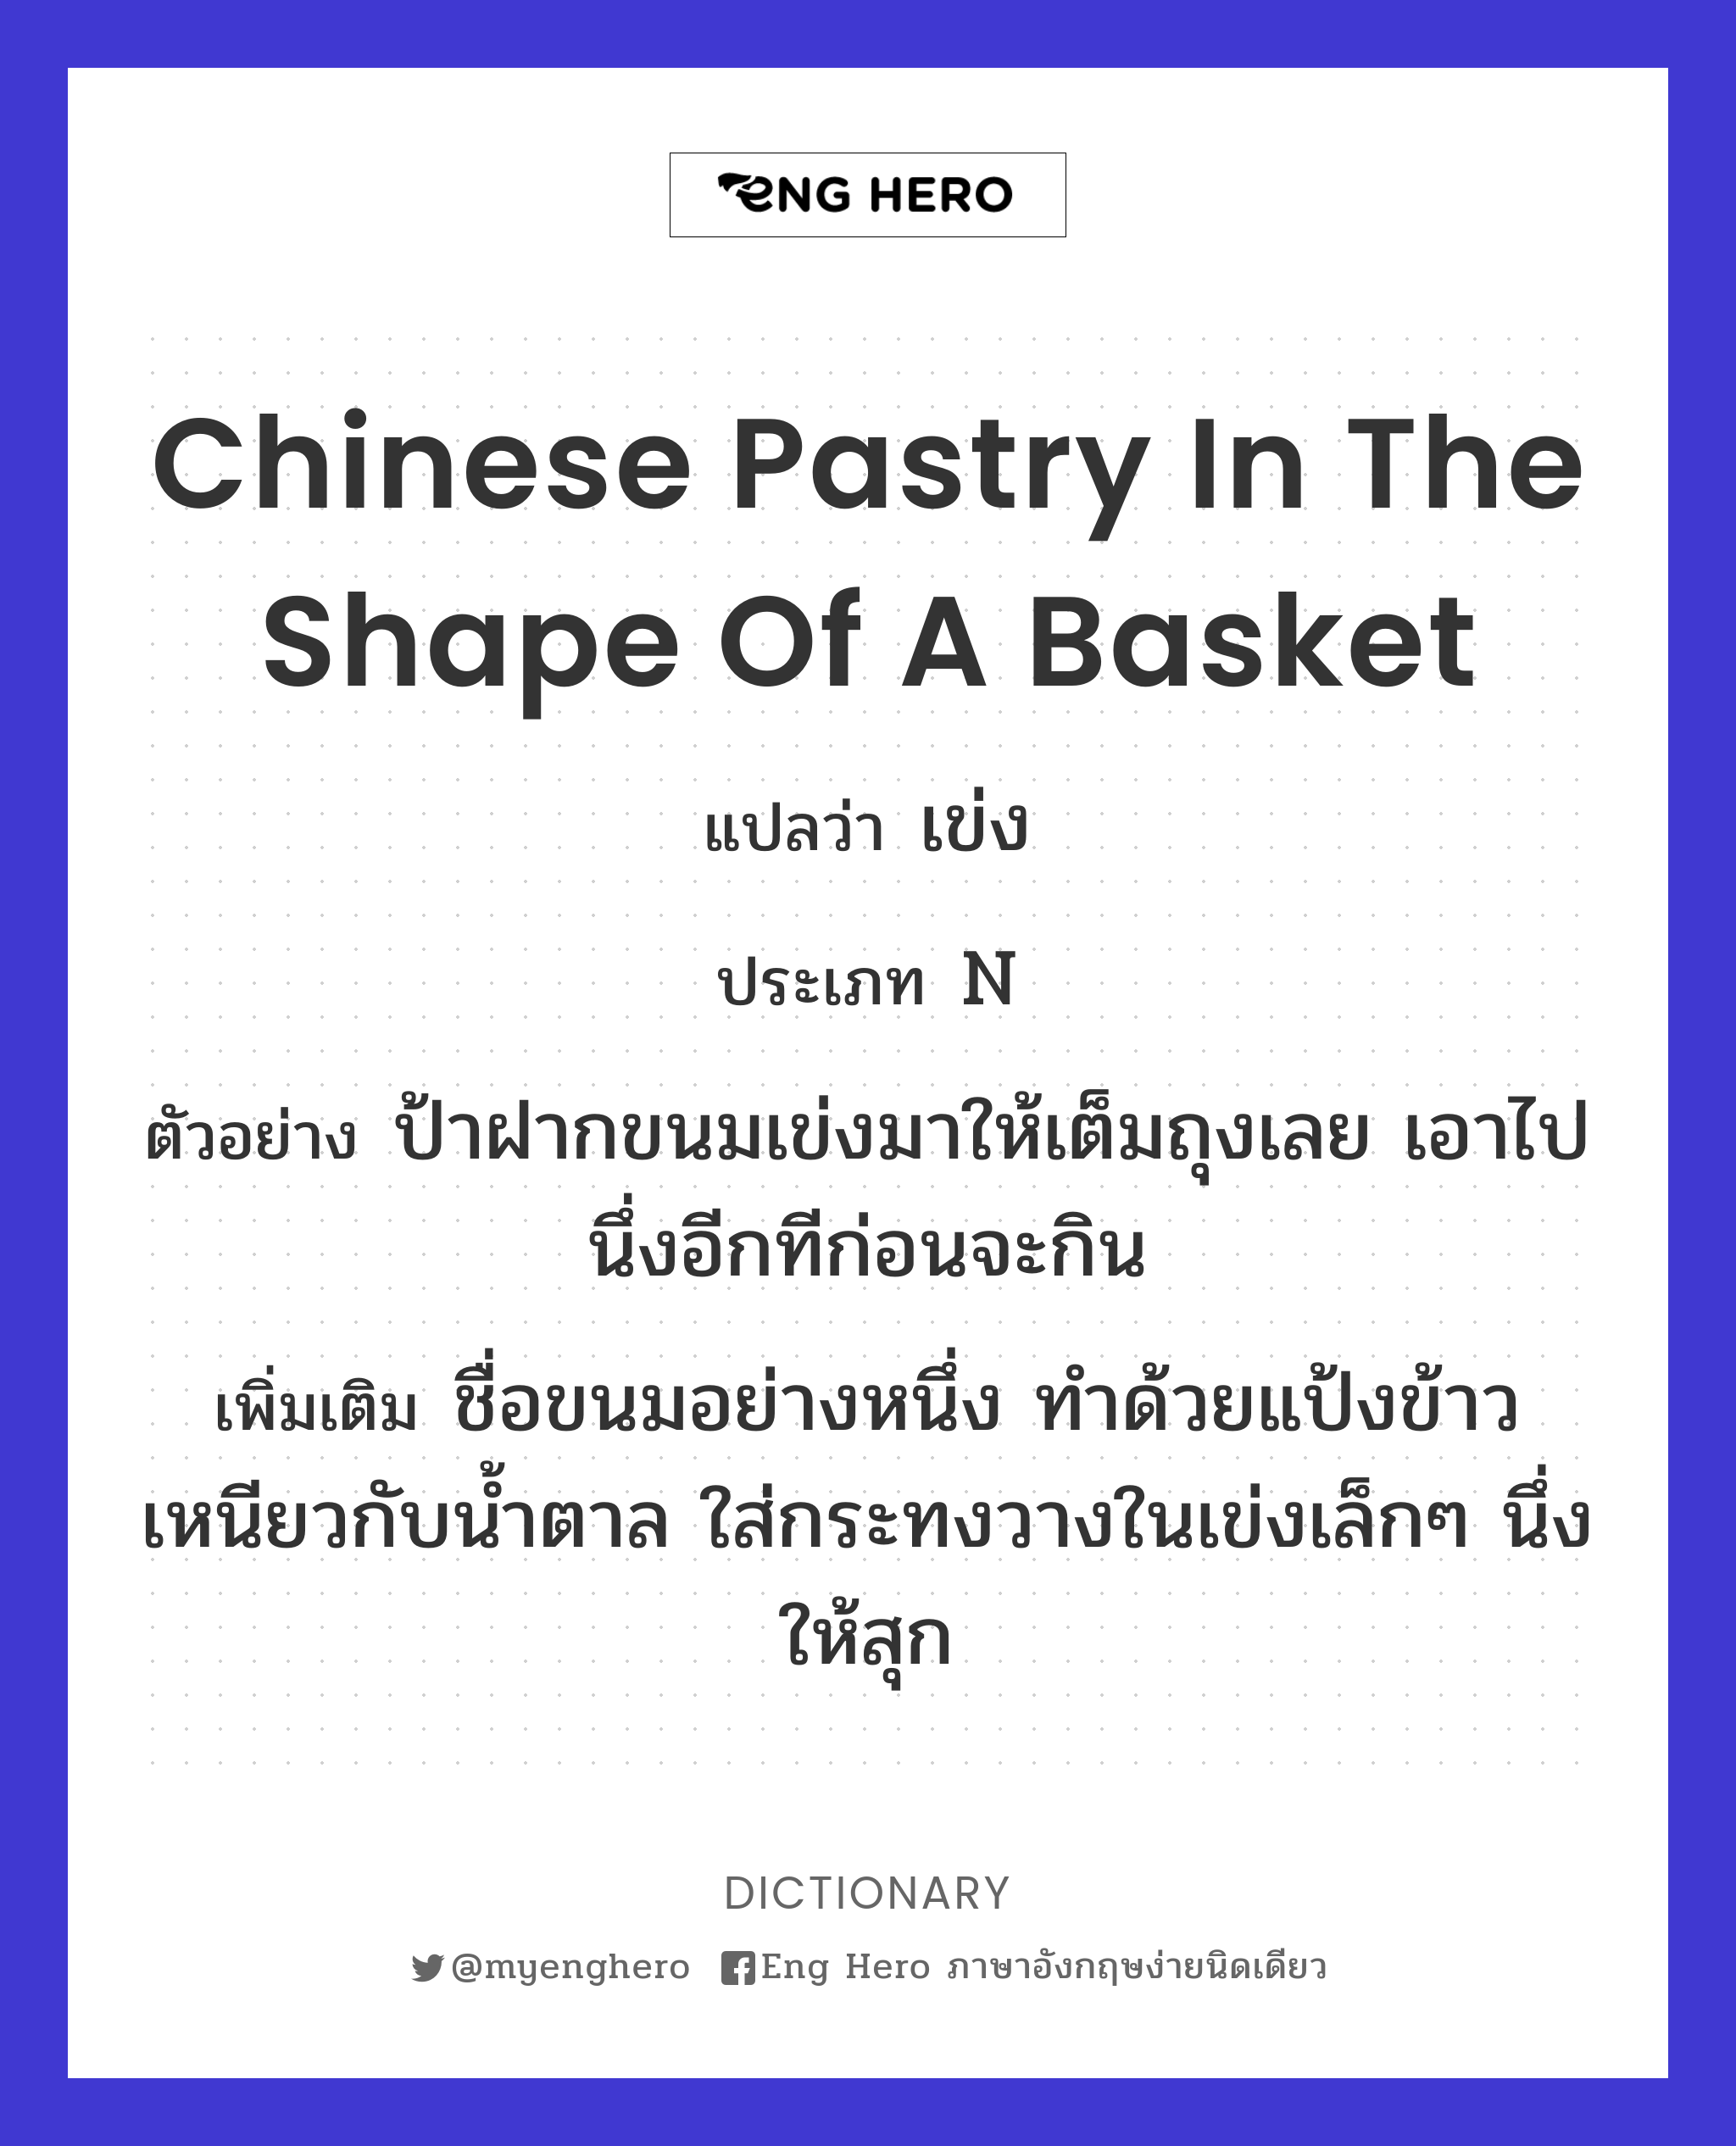 Chinese pastry in the shape of a basket